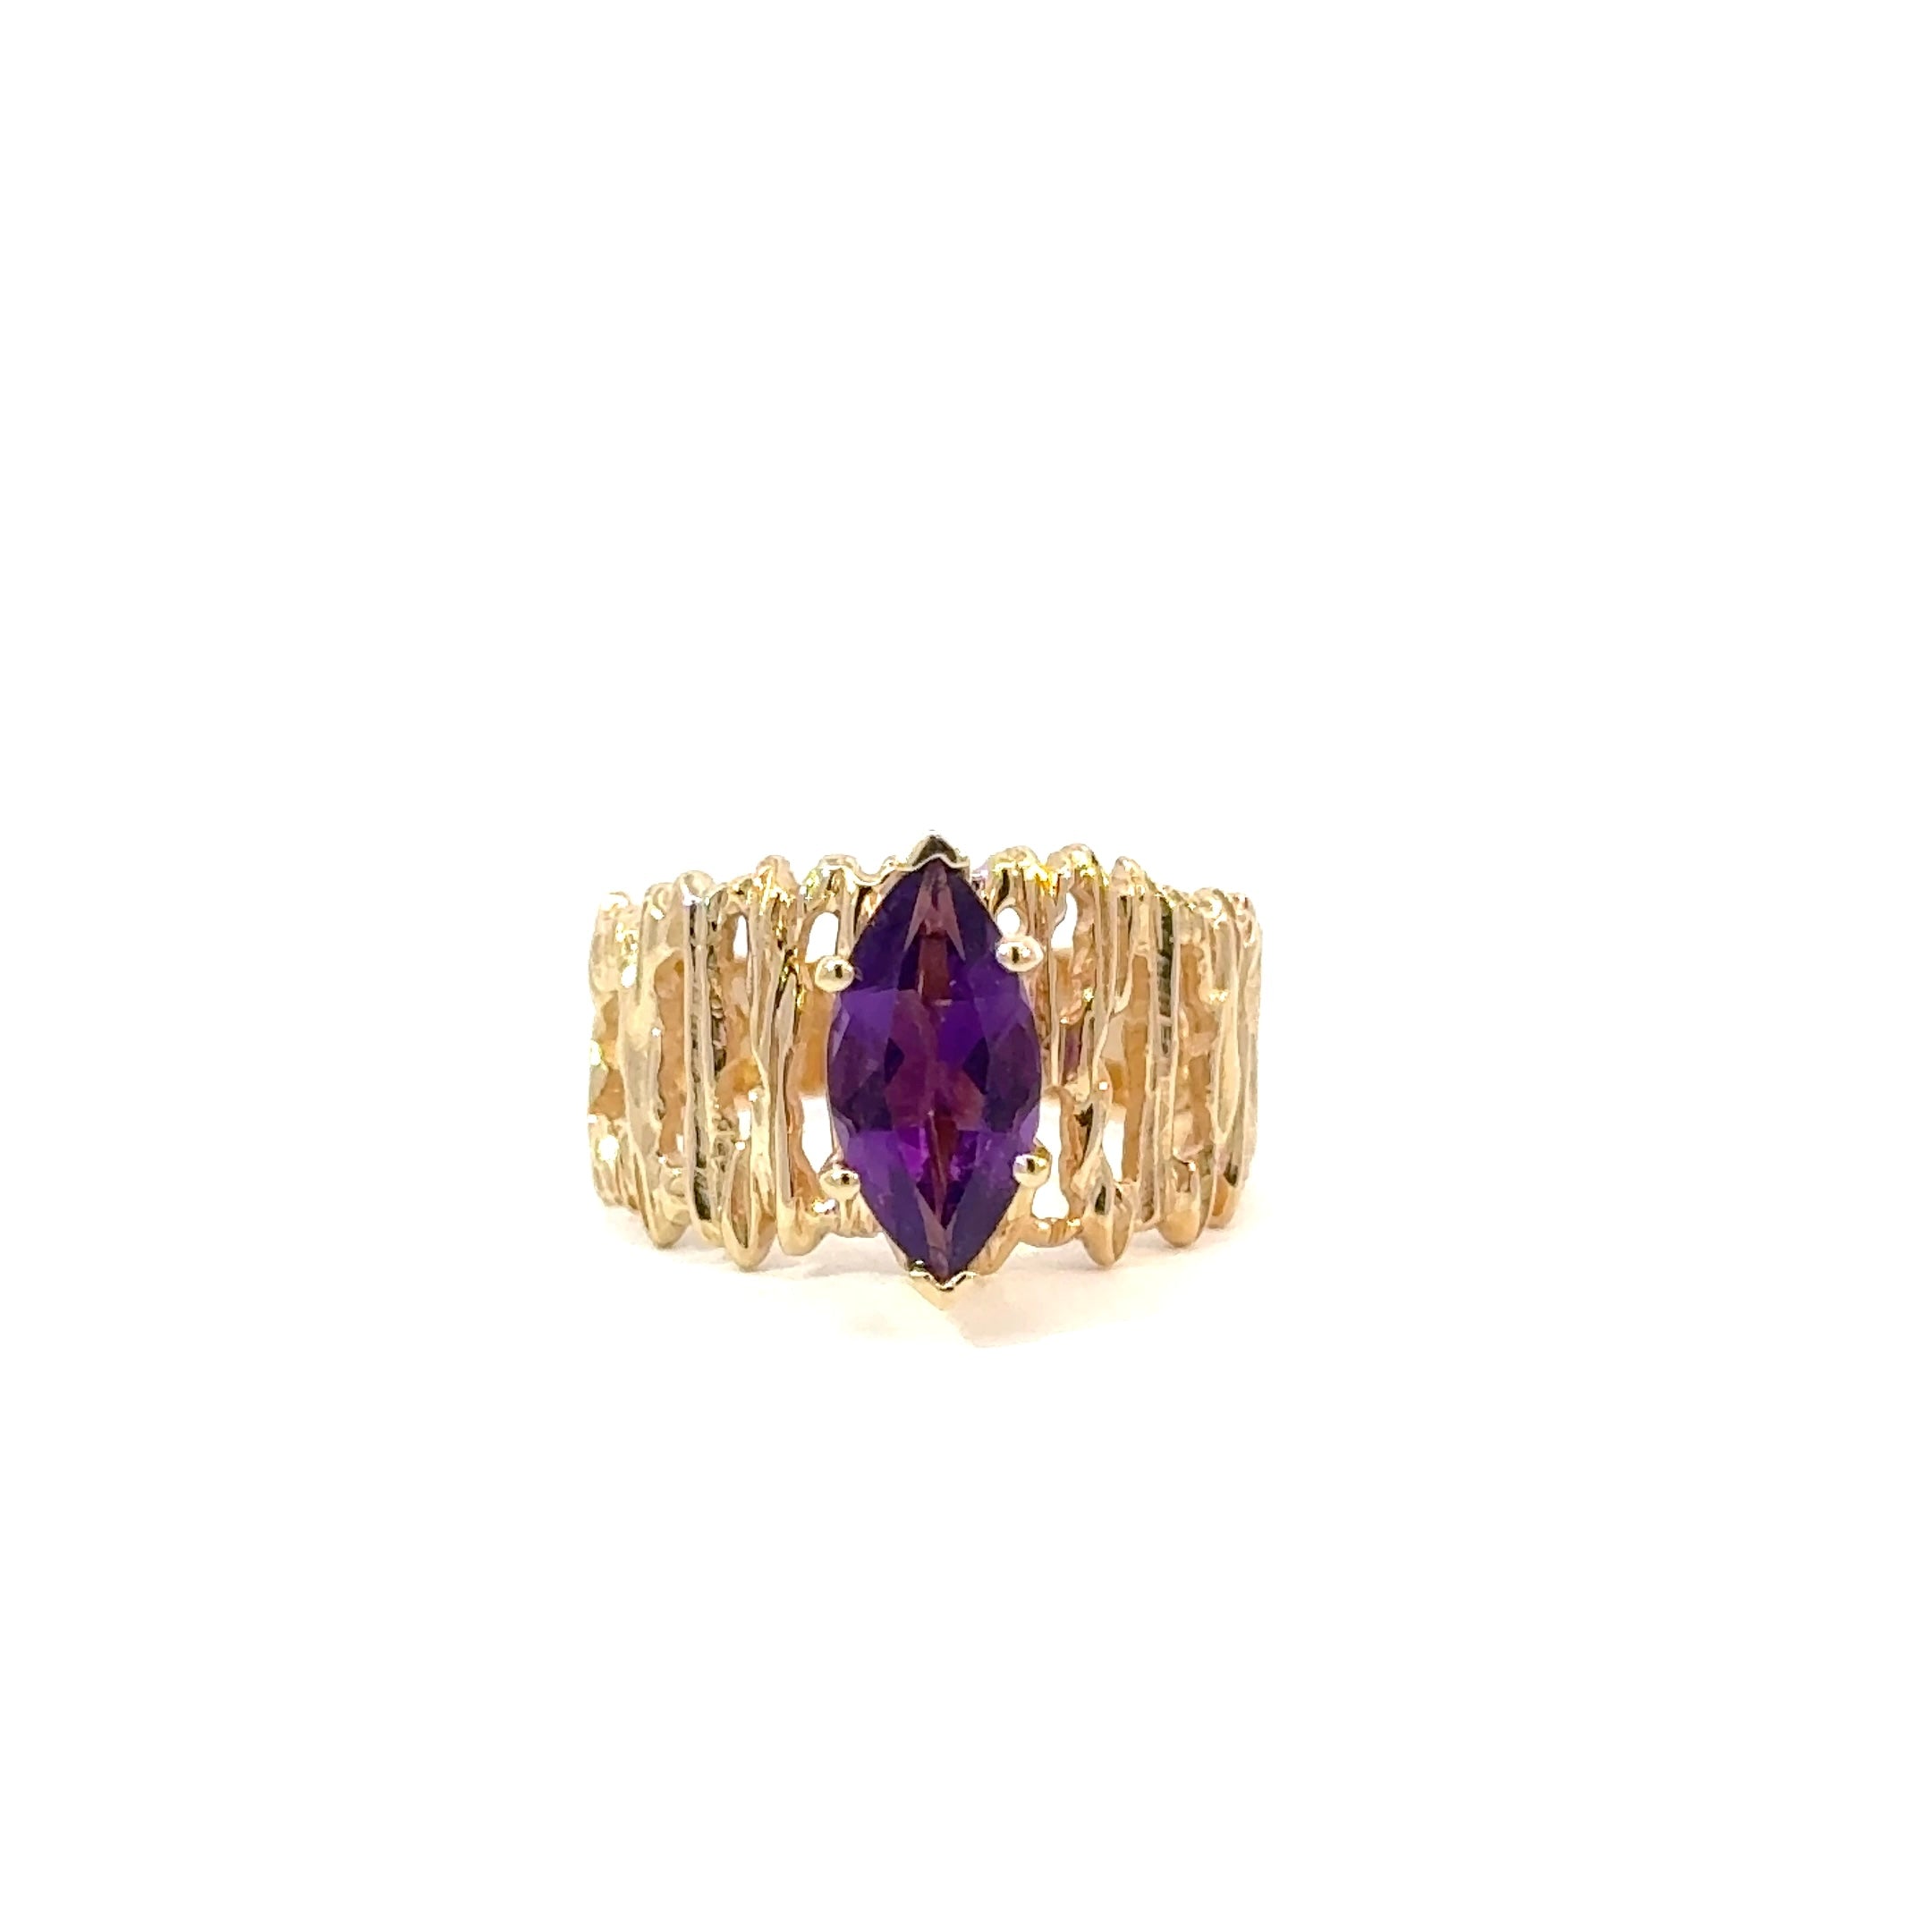 Vintage Marquise Cut Amethyst Ring in 14K Gold